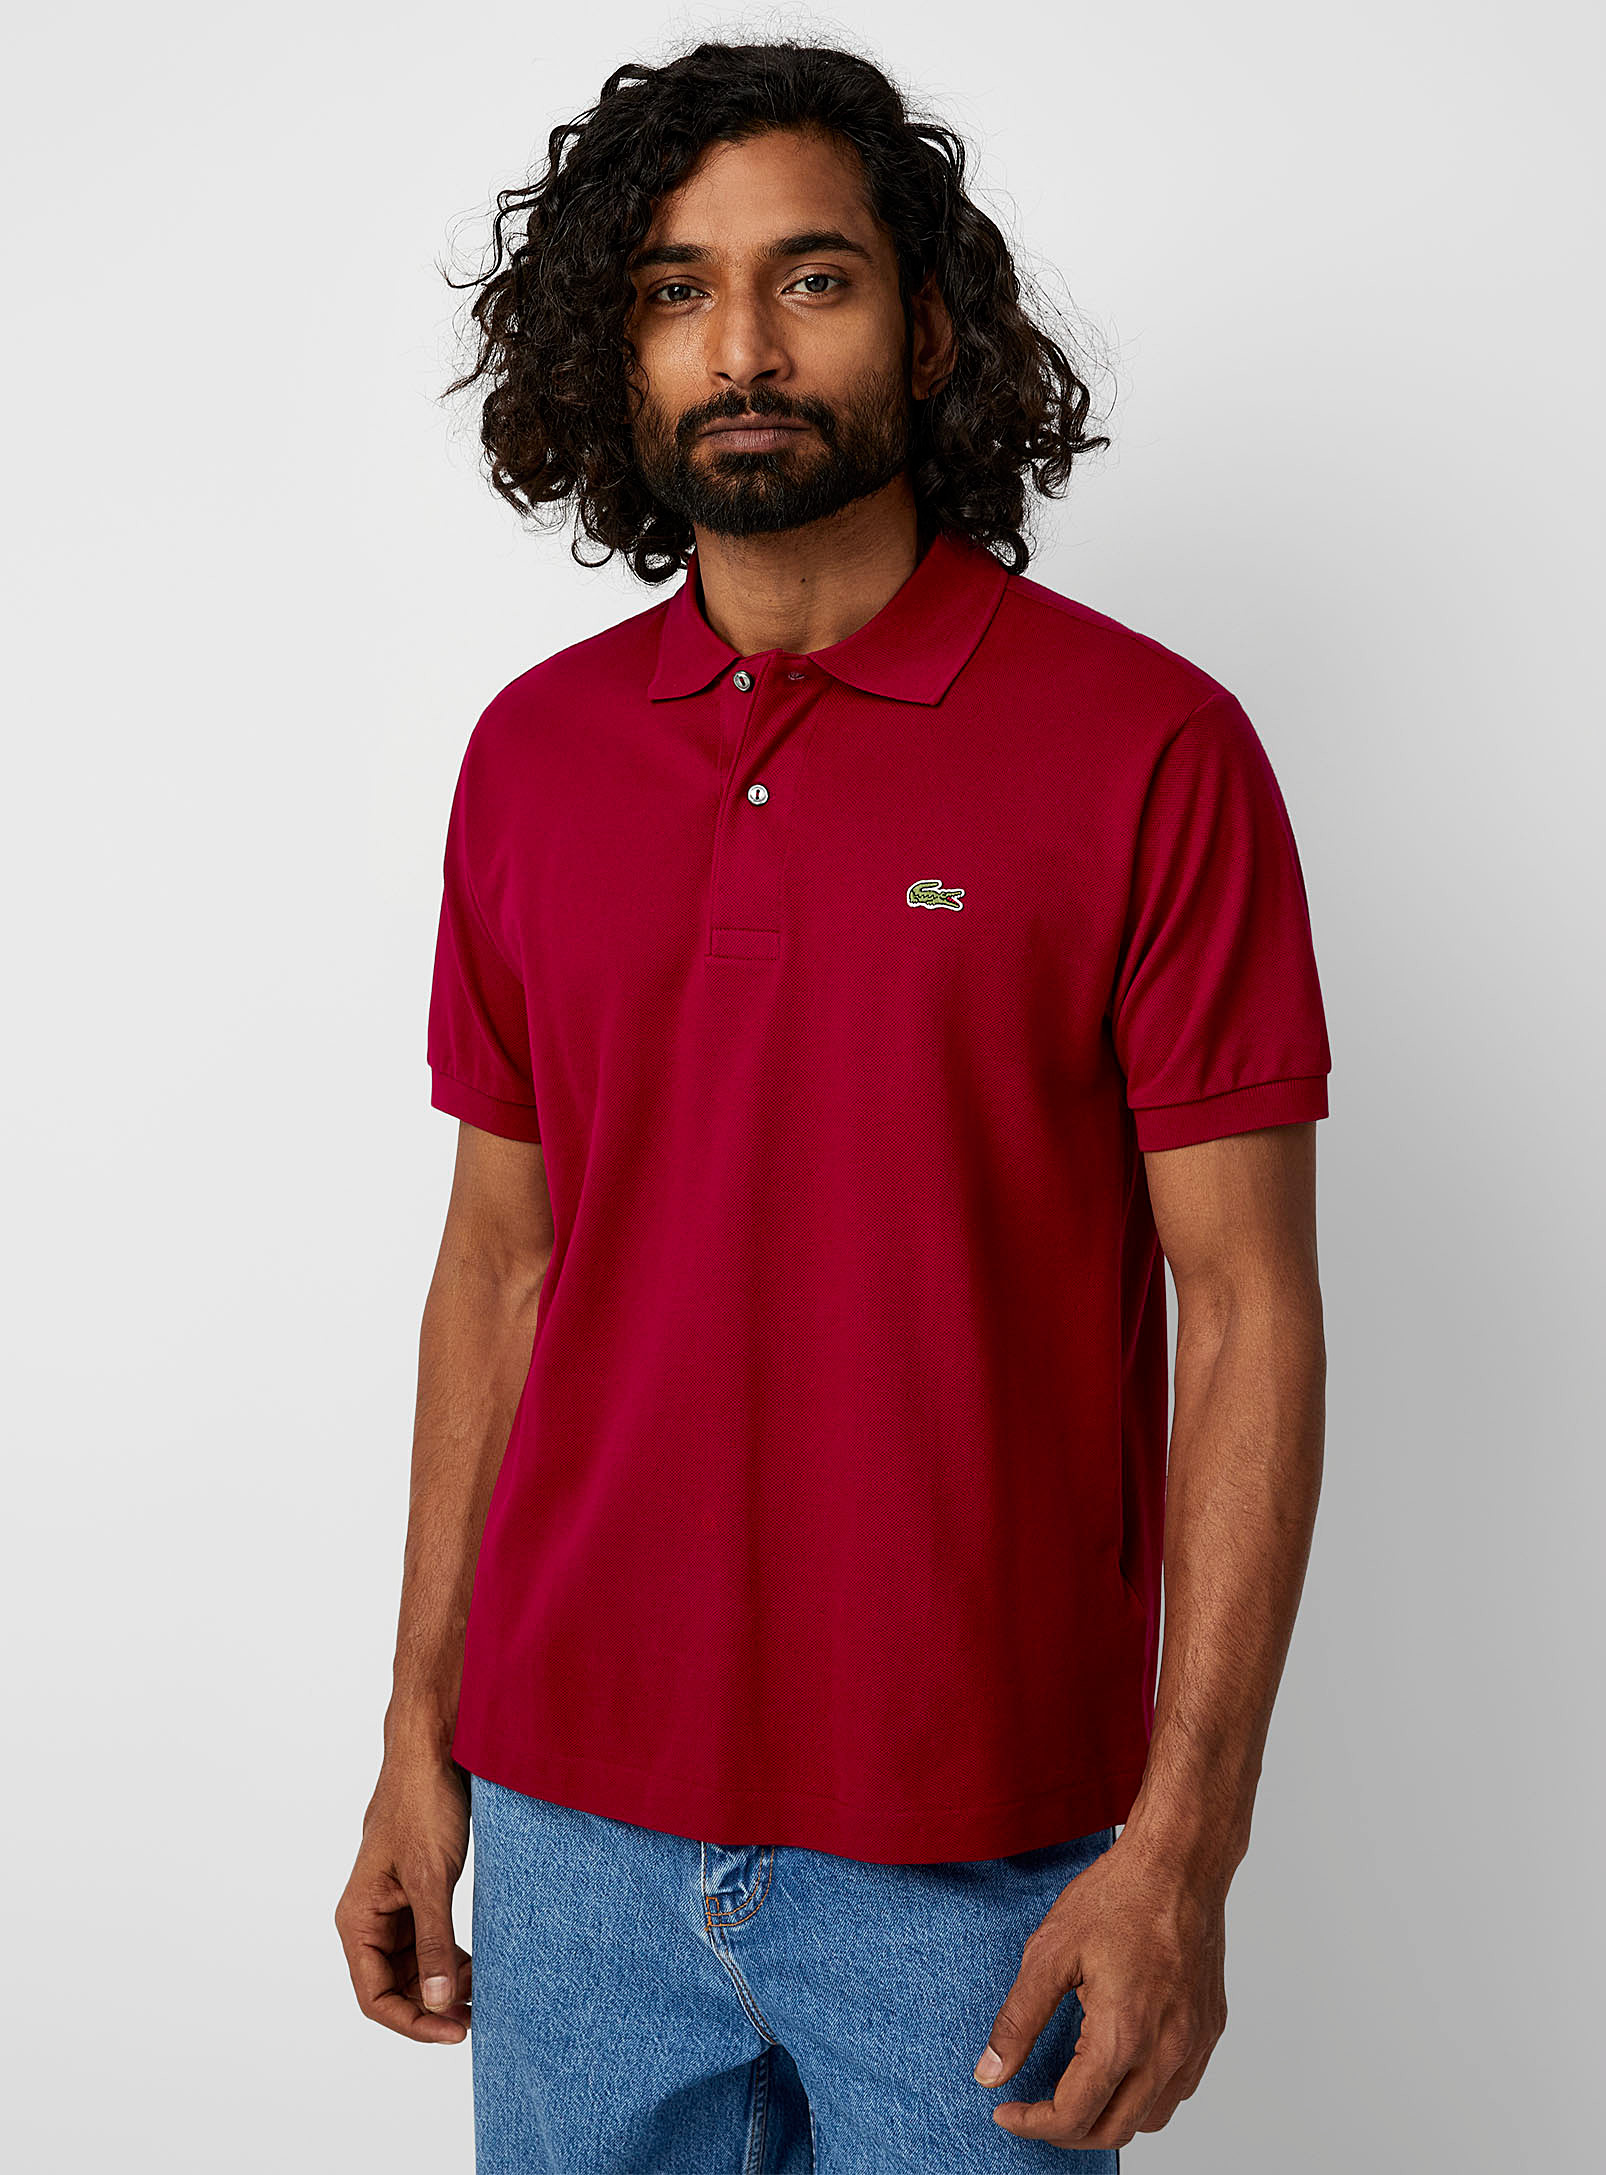 Lacoste Classic Piqué Croc Polo In Ruby Red